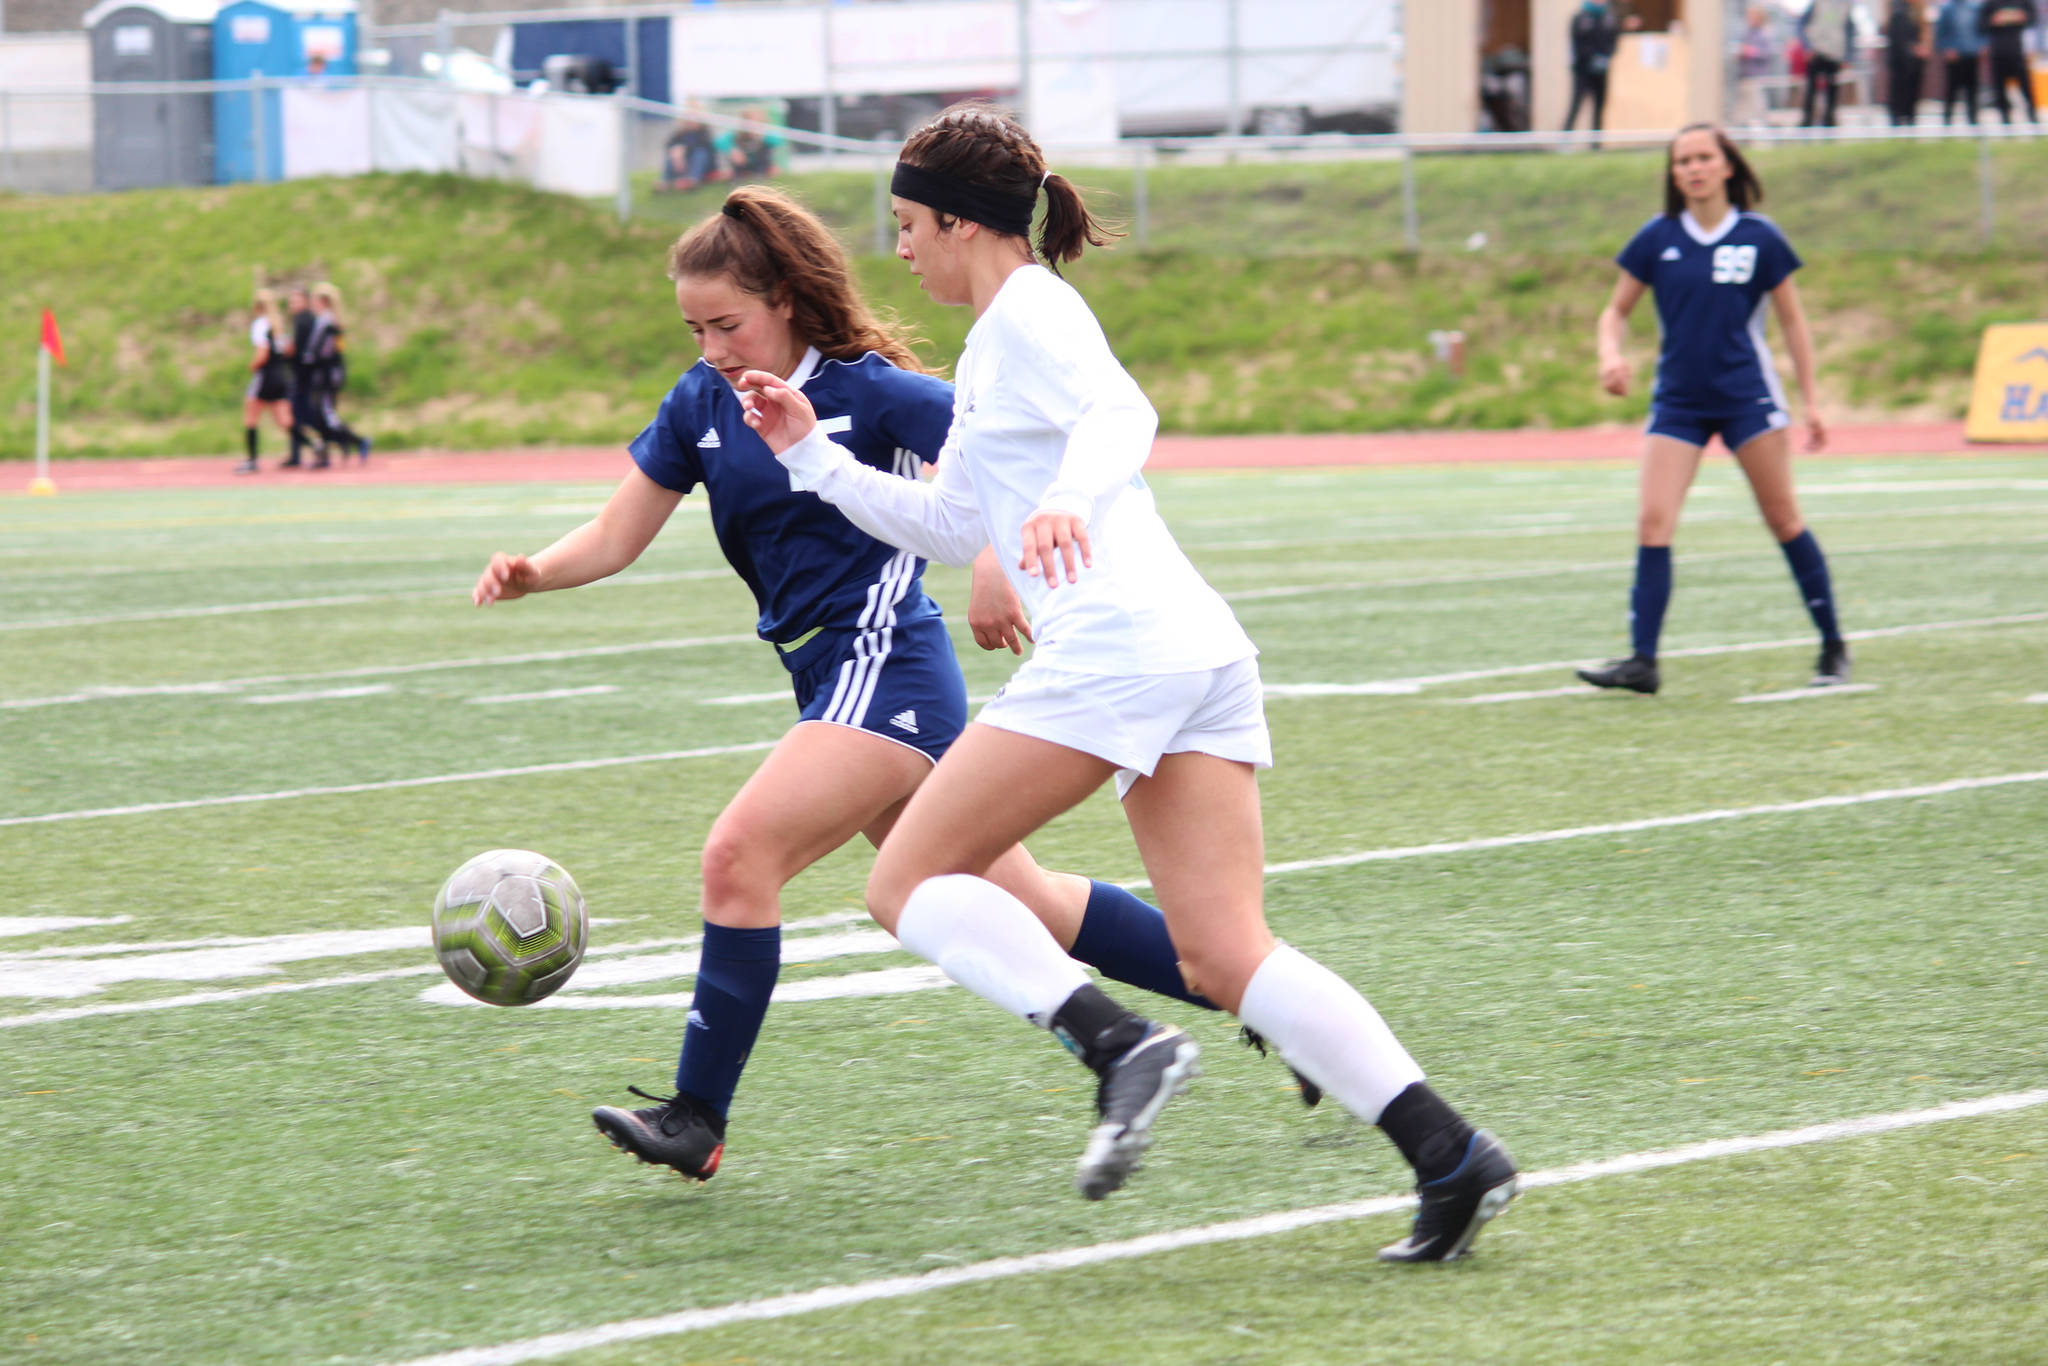 Soldotna’s Katherine Bramante and Thunder Mountain’s Keana Villanueva race to the ball during a semifinal game at the Division II state soccer championships Friday at Service High School in Anchorage. (Photo by Megan Pacer/Homer News)